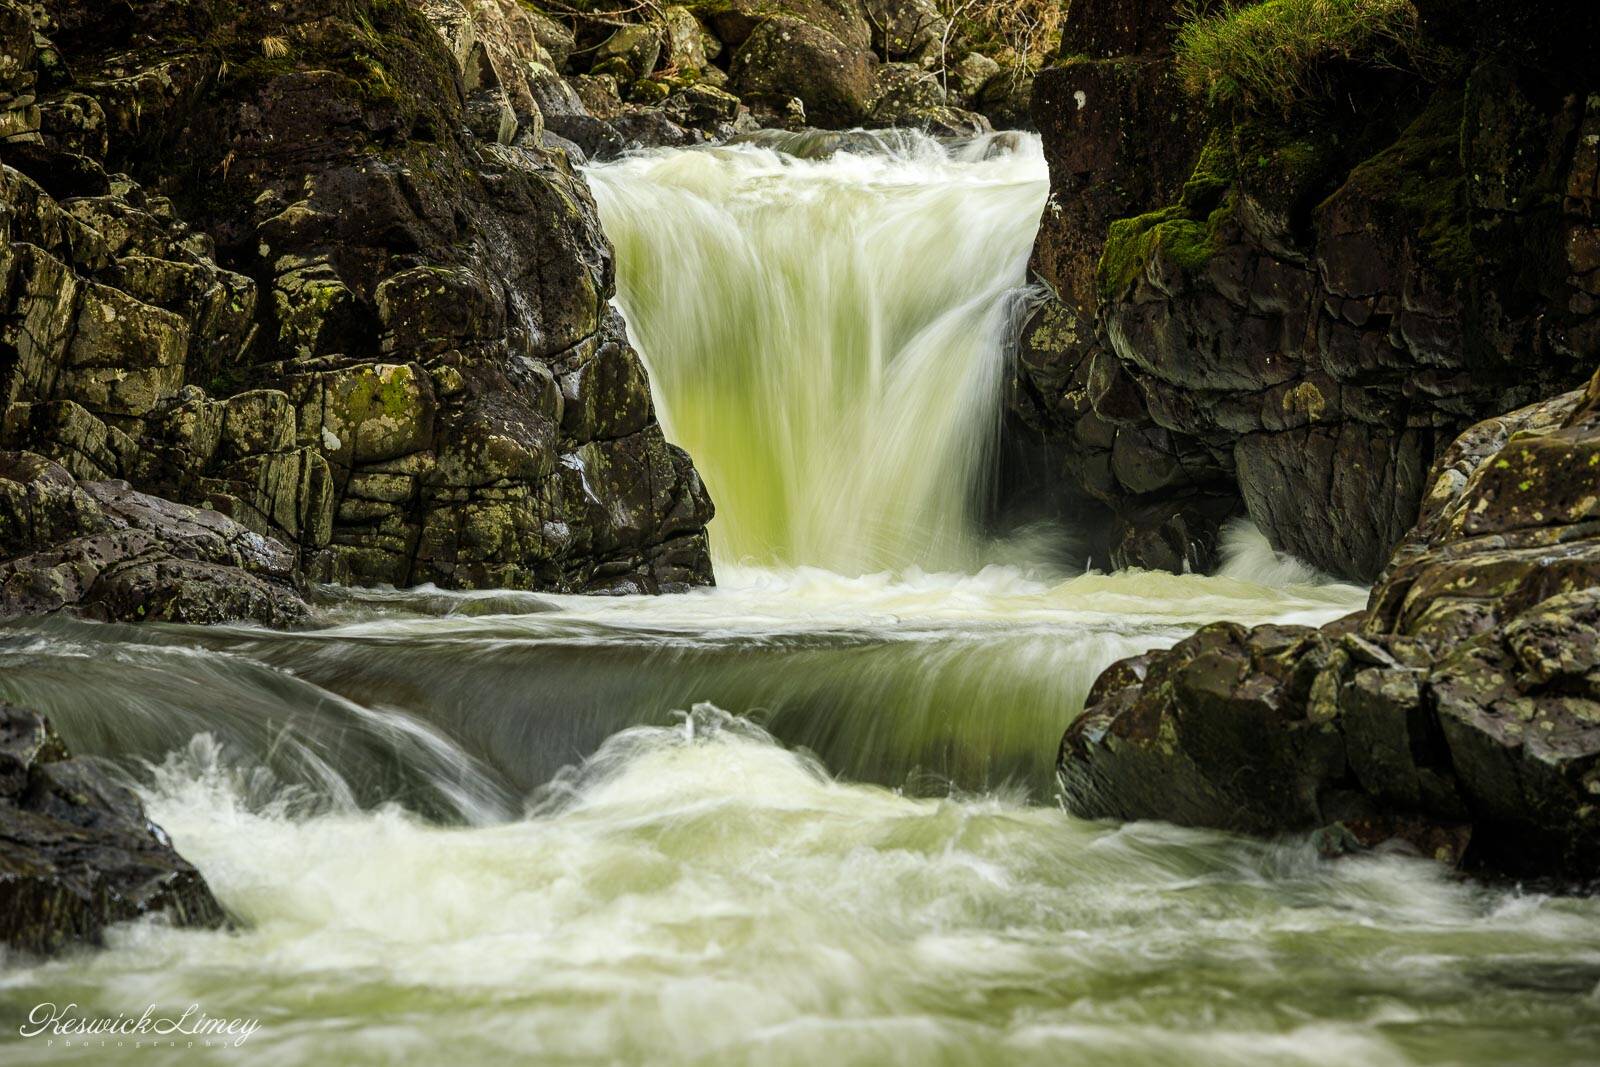 Image of Alison Grass Hoghouse and Galleny Force Waterfall by David Leighton